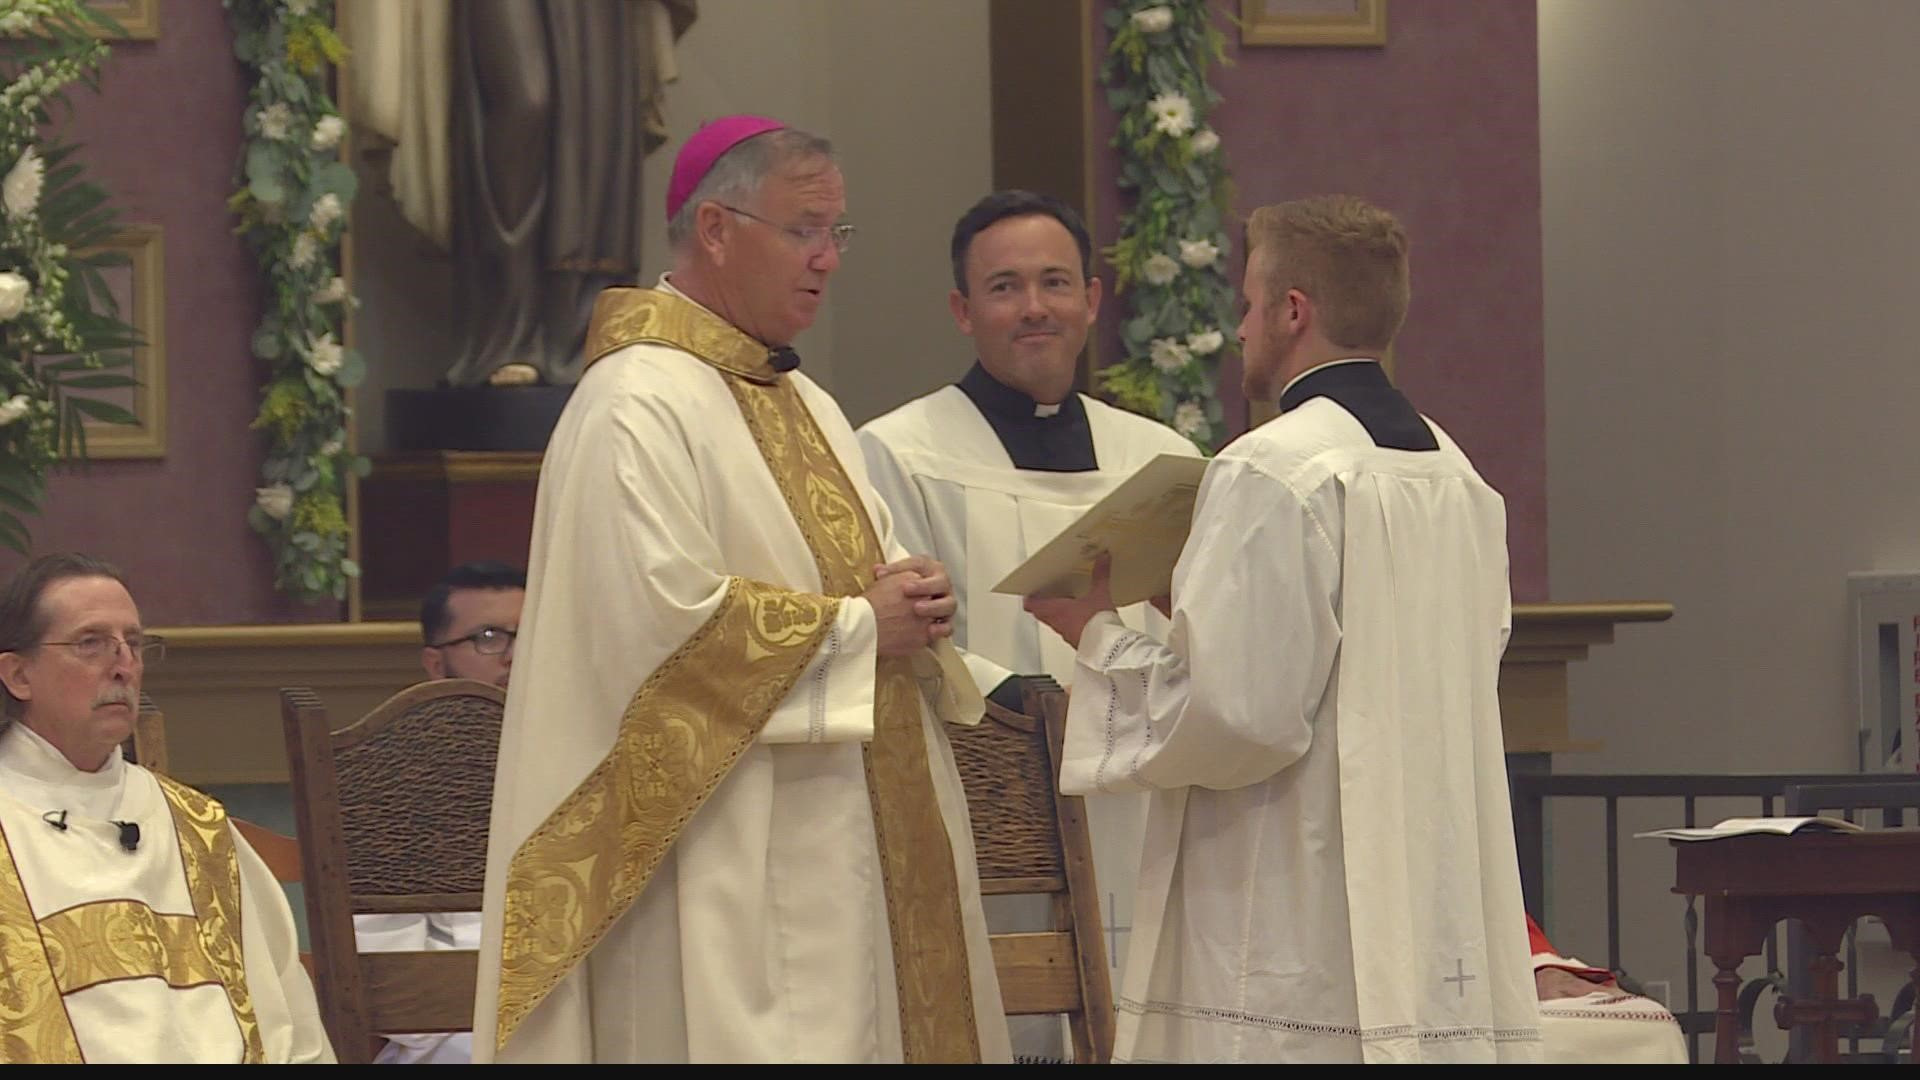 The Roman Catholic Diocese of Phoenix welcomed its new bishop during a special installation mass at St. Thomas Aquinas Catholic Church in Avondale on Tuesday.